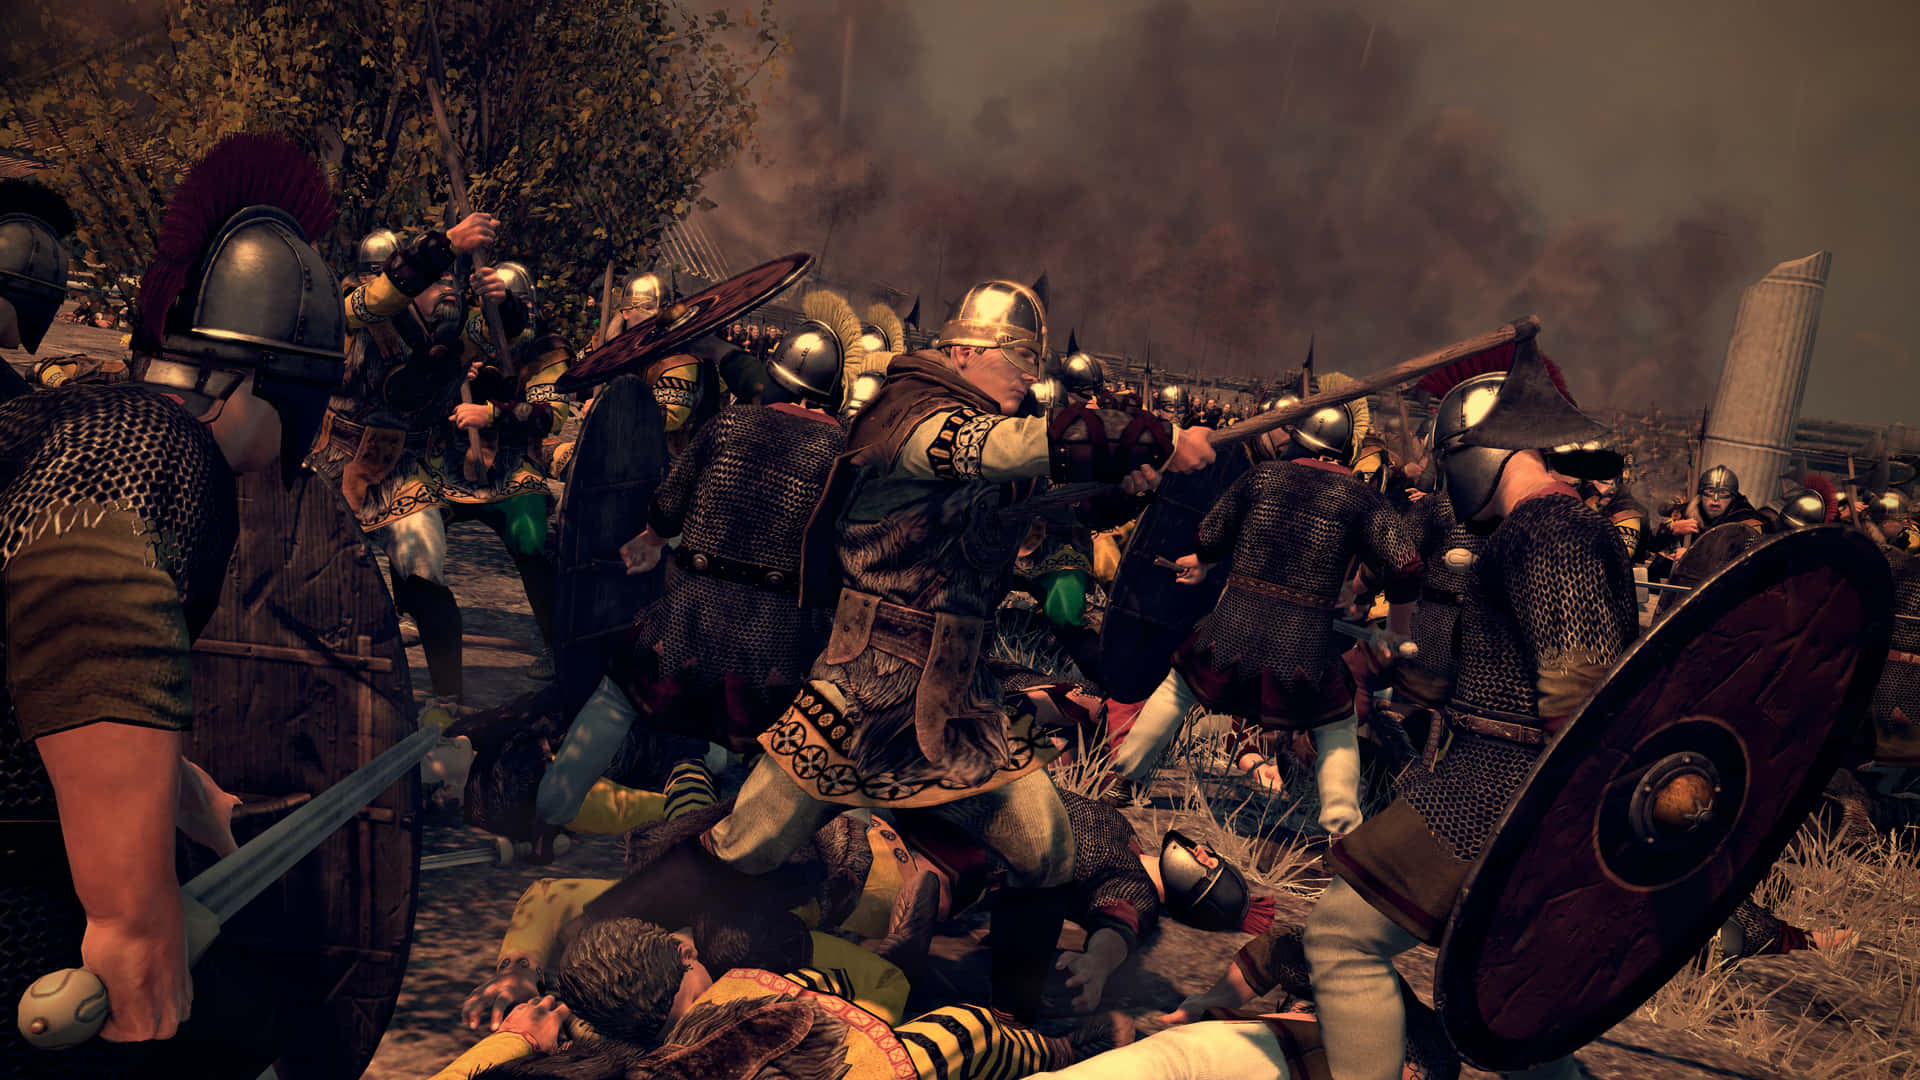 A Group Of Men In Armor Fighting In A Battle